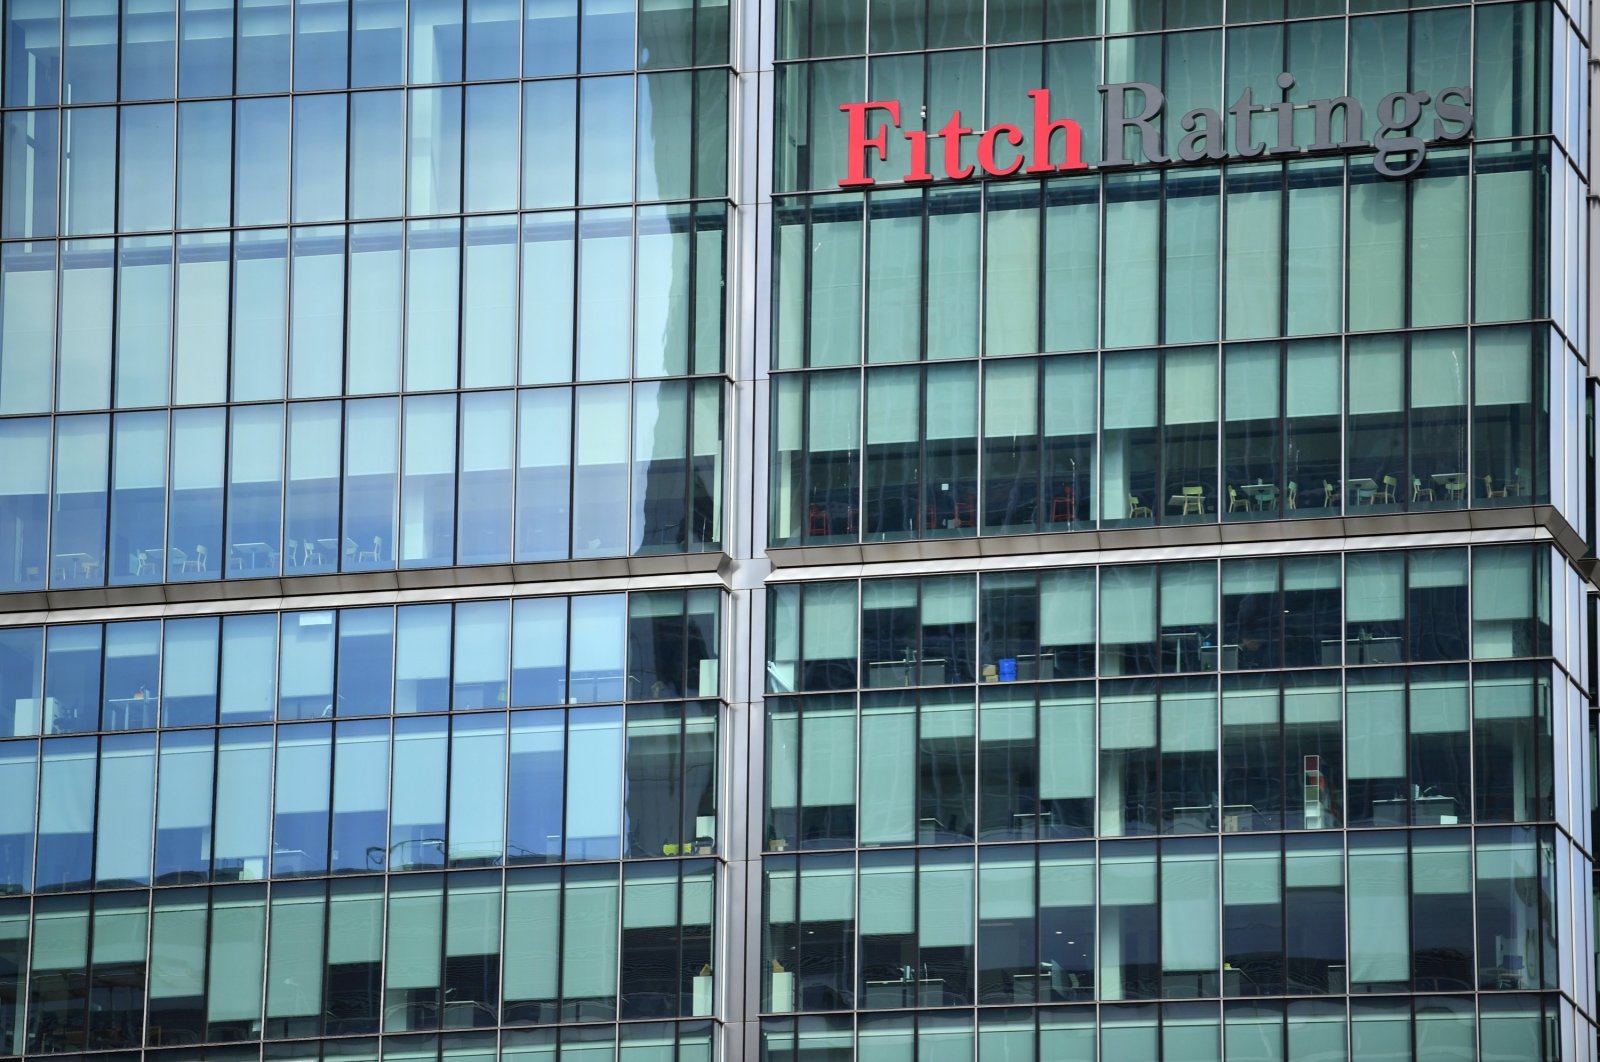 The offices of the Fitch Ratings building are seen in Canary Wharf, London, U.K., May 27, 2020. (Reuters Photo)